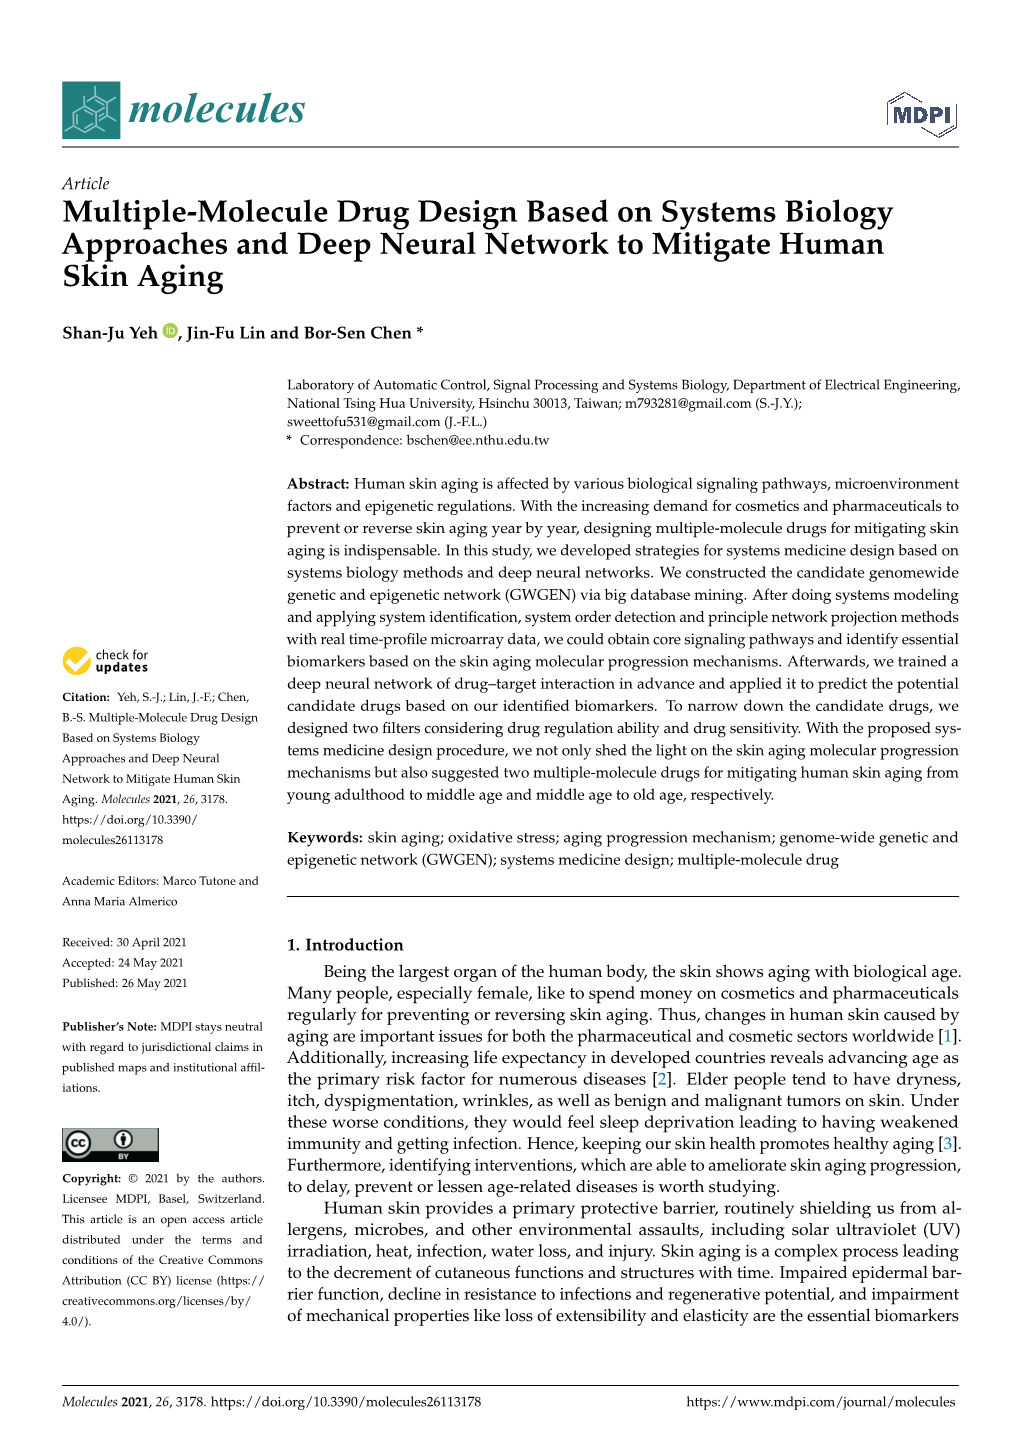 Multiple-Molecule Drug Design Based on Systems Biology Approaches and Deep Neural Network to Mitigate Human Skin Aging